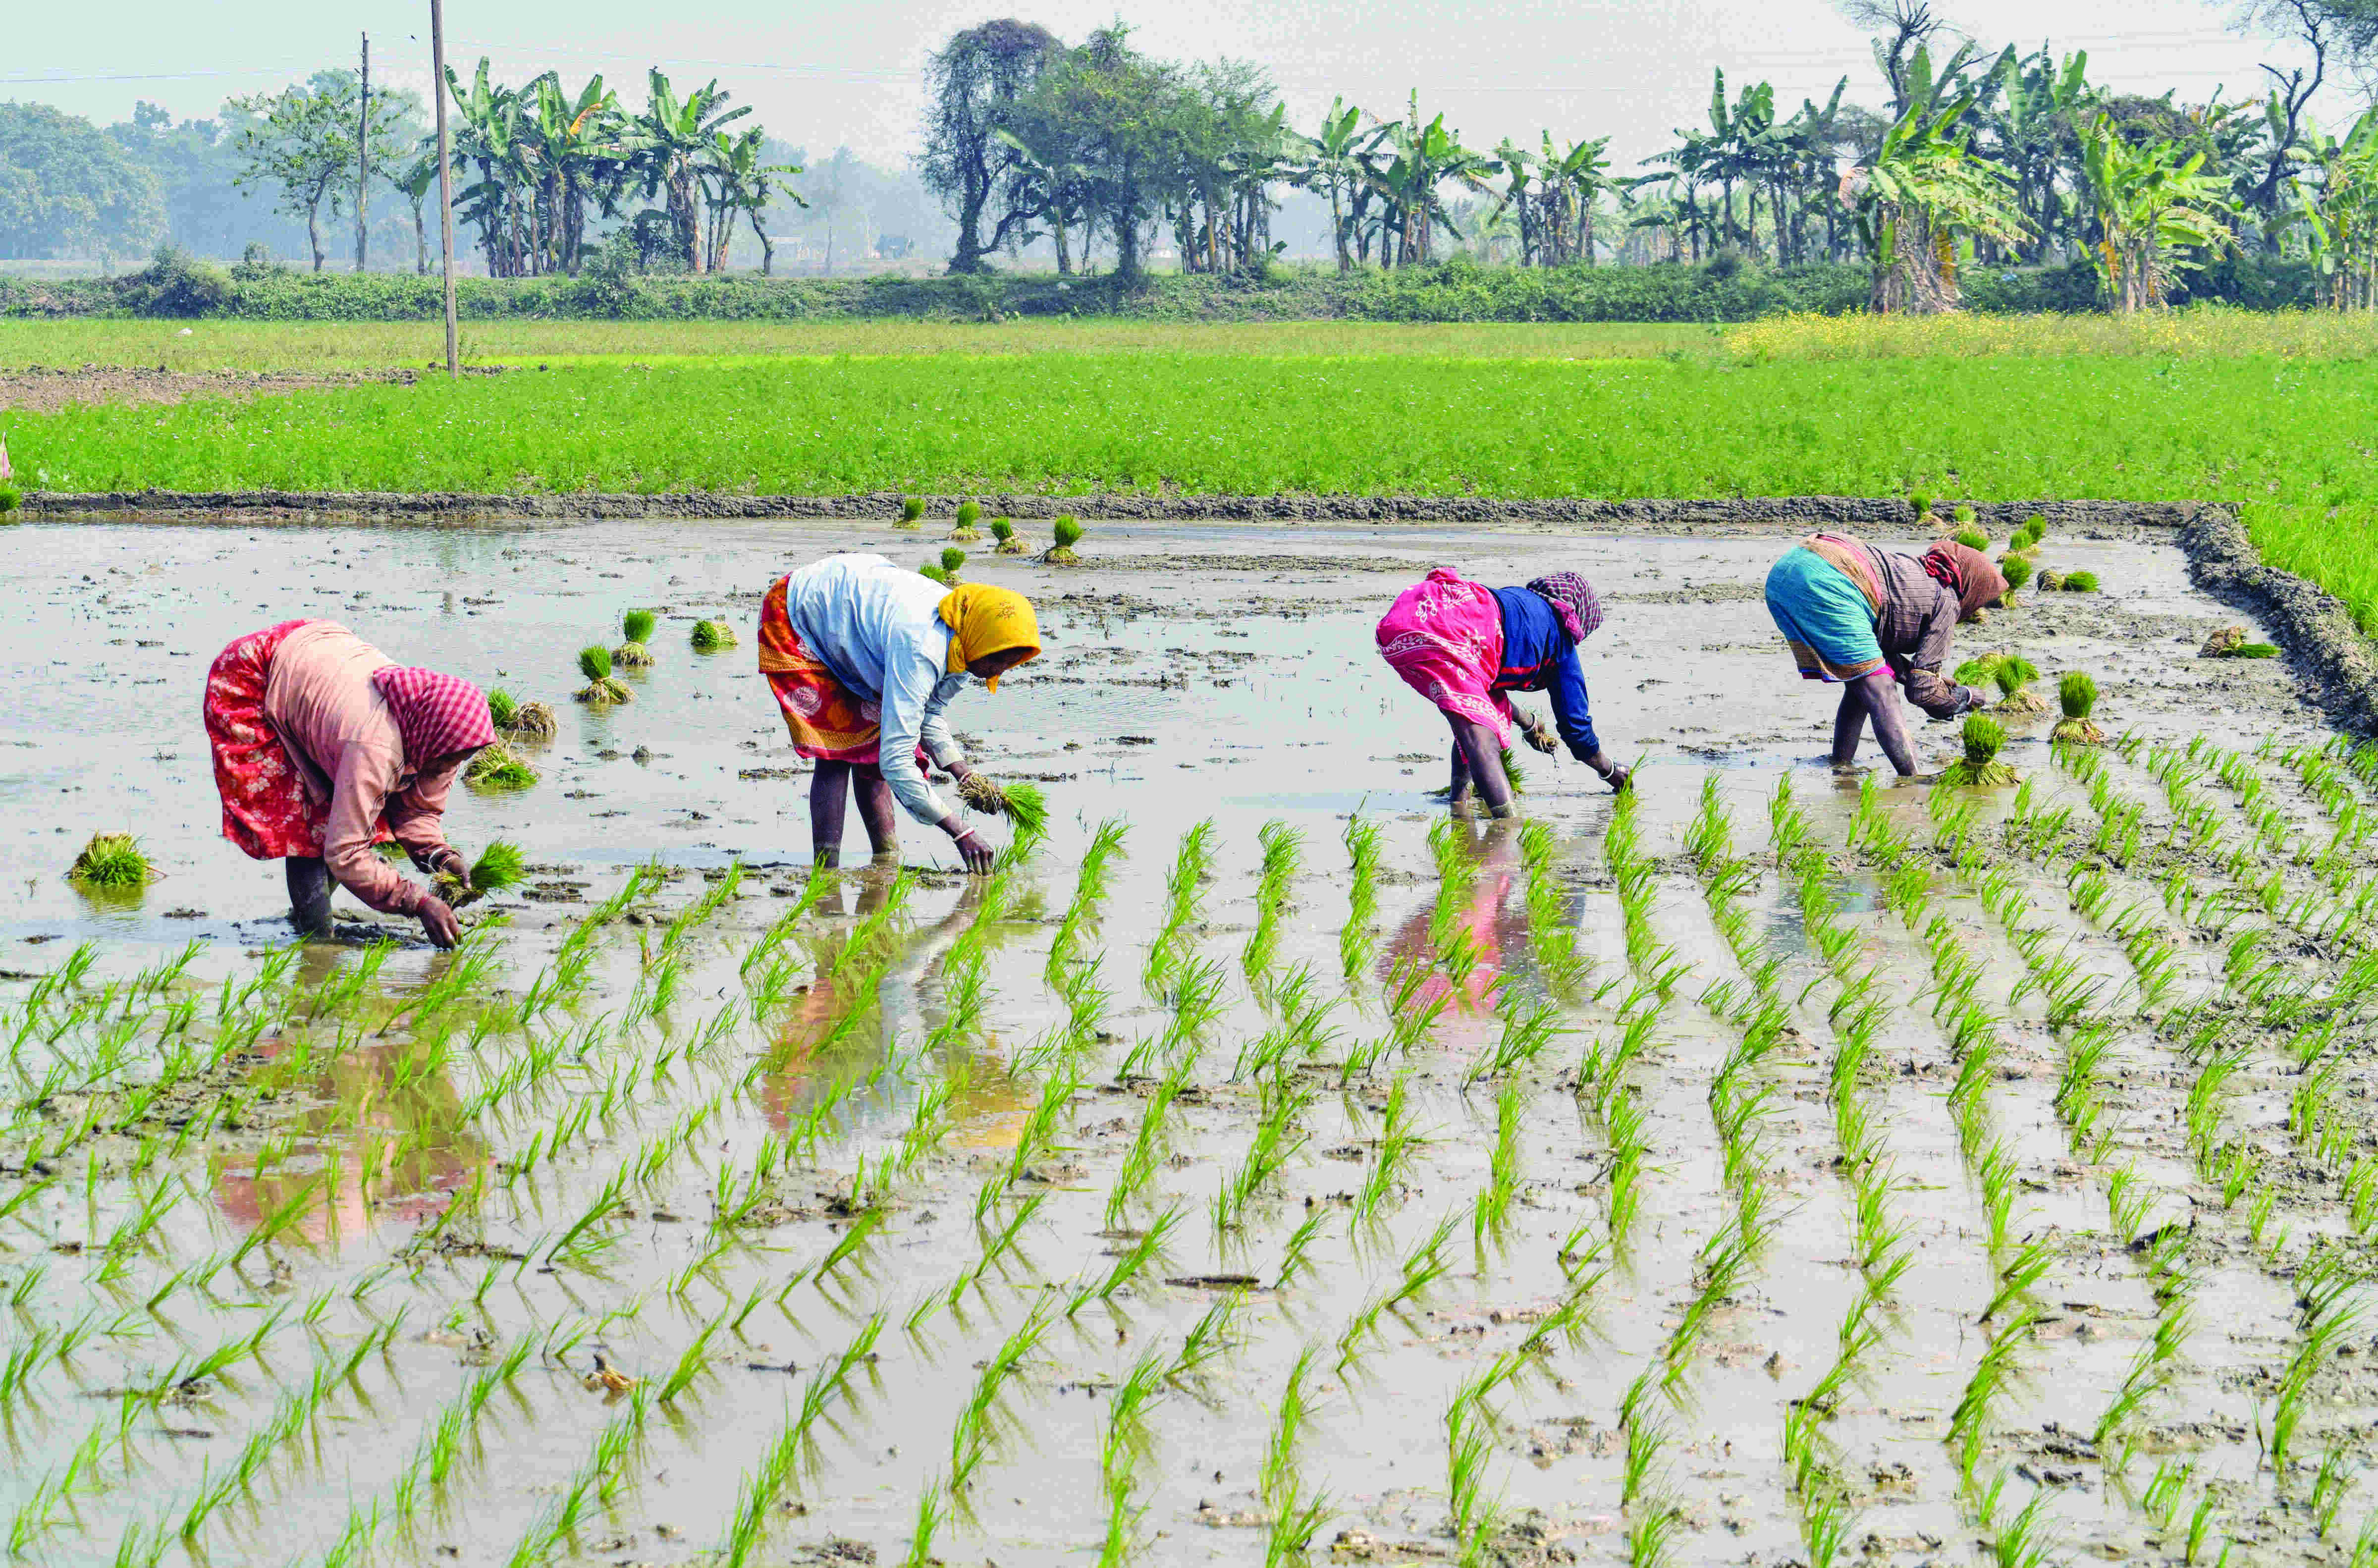 Bengals agri growth rate better than most states, including UP 